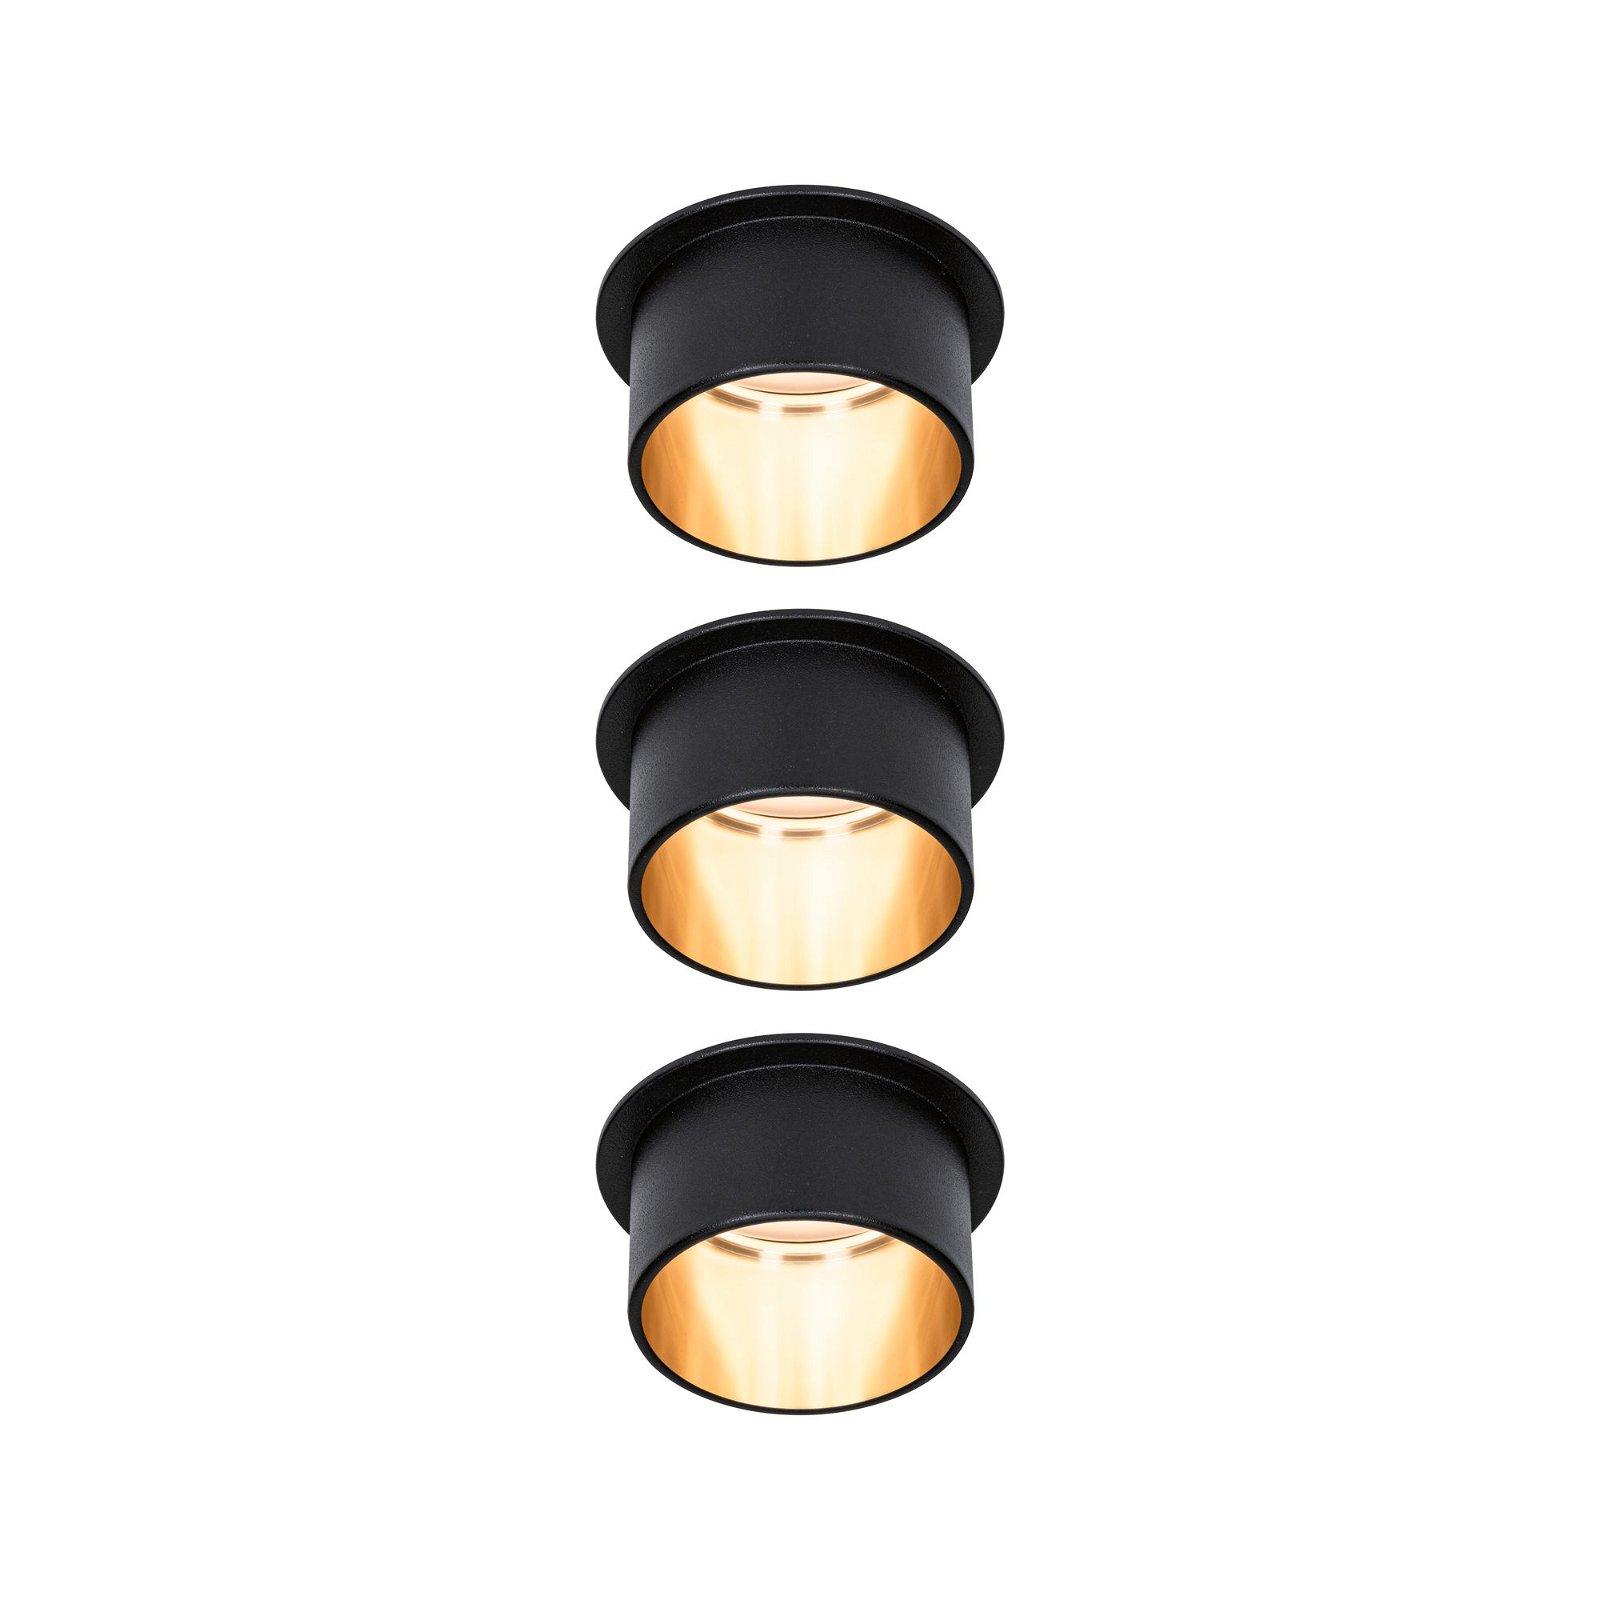 LED Recessed luminaire 3-Step-Dim Gil Coin Basic Set IP44 round 68mm Coin 3x6W 3x470lm 230V dimmable 2700K Black matt/Gold